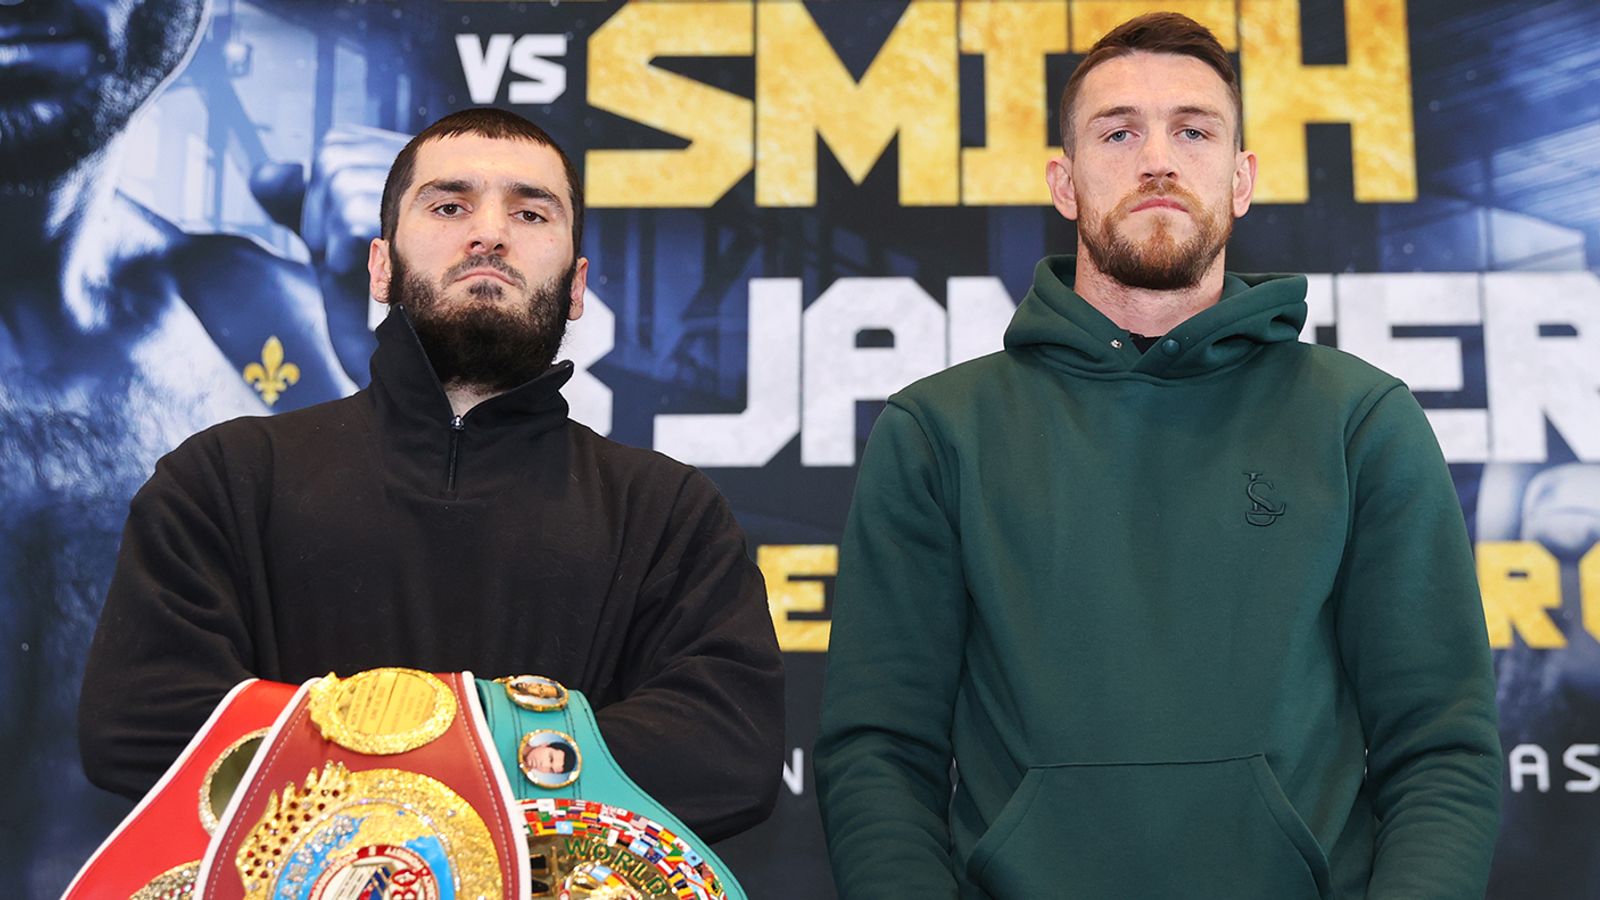 Callum Smith on Artur Beterbiev making three crucial mistakes going into their unified WBC, IBF and WBO title fight | Boxing News | Sky Sports